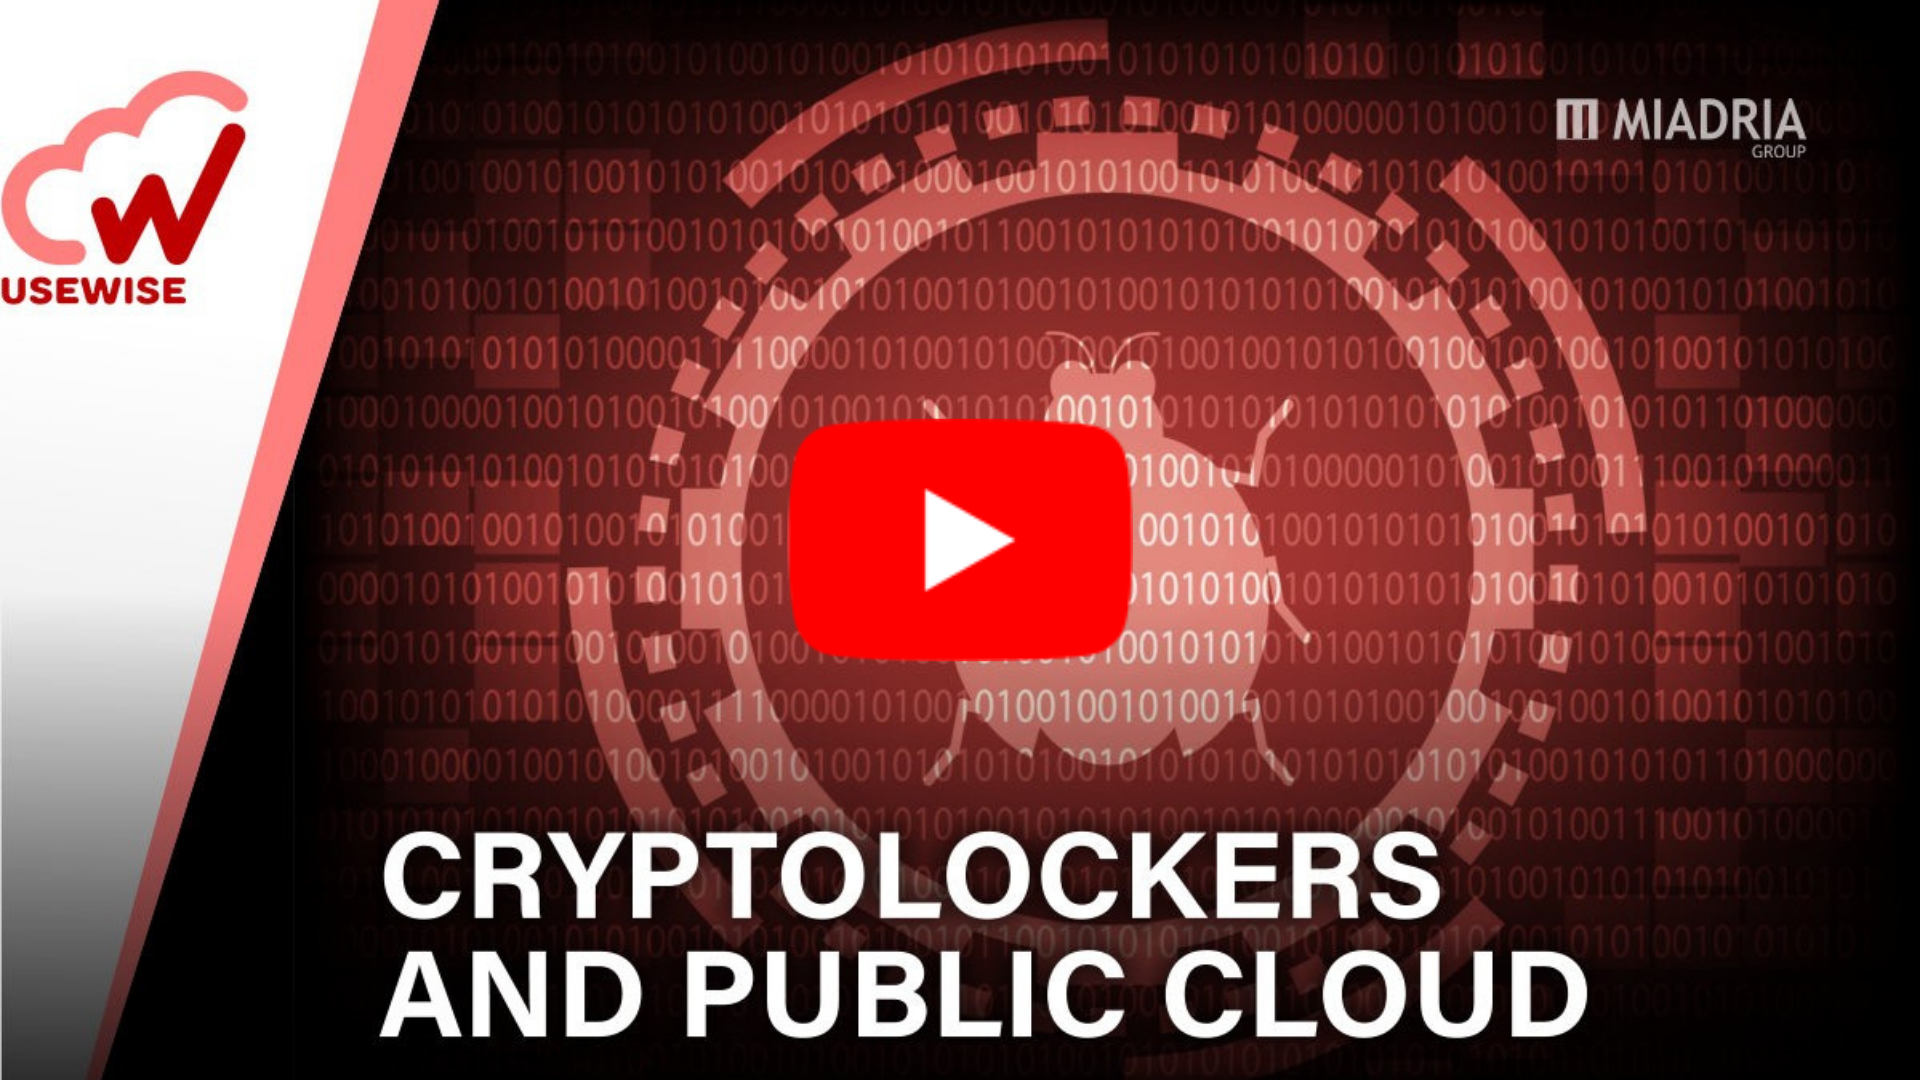 Cryptolockers and public cloud